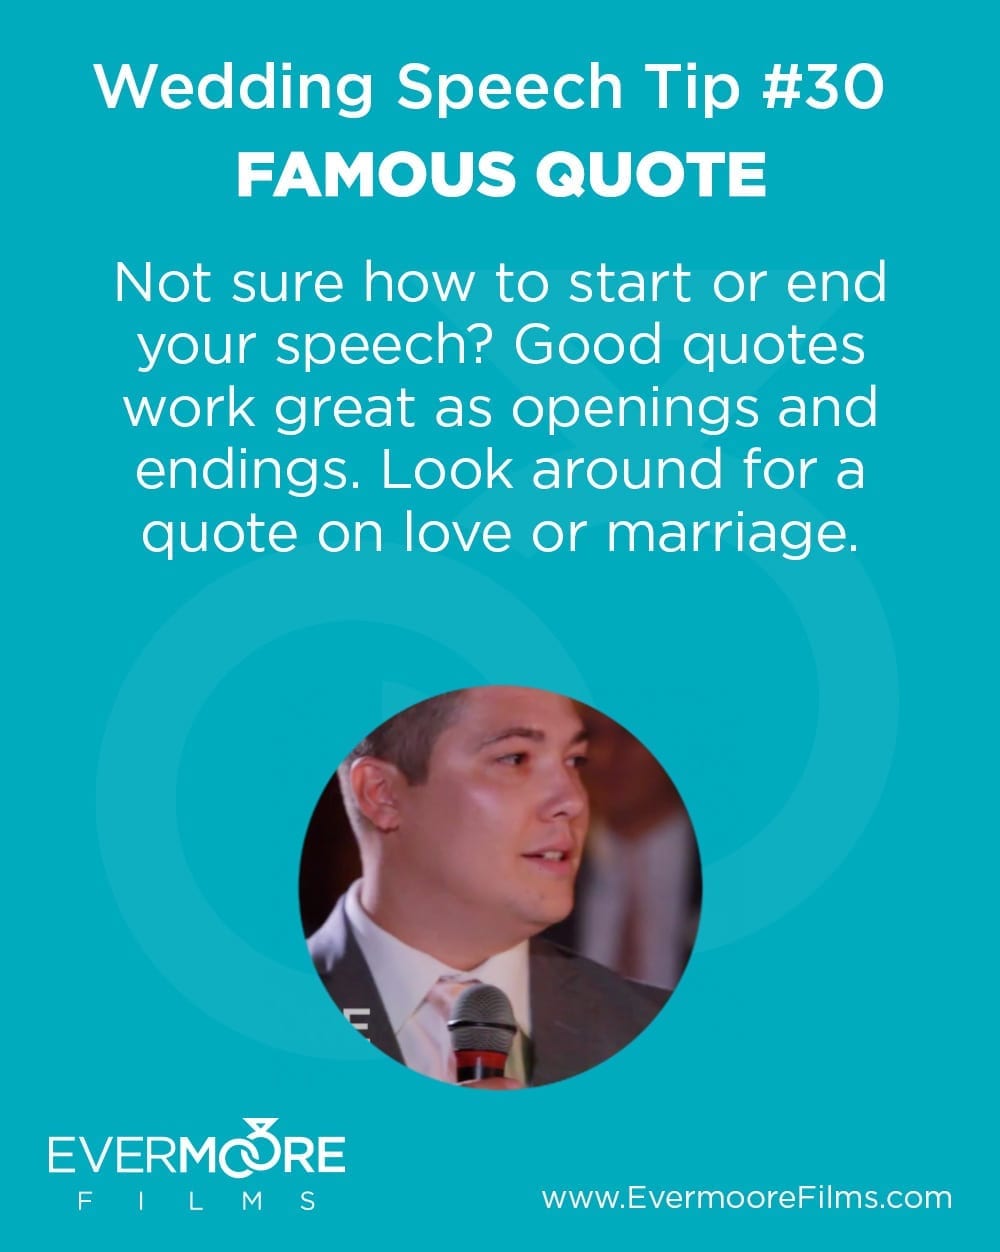 Famous Quote | Wedding Speech Tip #30 | Evermoore Films | Not sure how to start or end your speech? Good quotes work great as openings and endings. Look around for a quote on love and marriage.